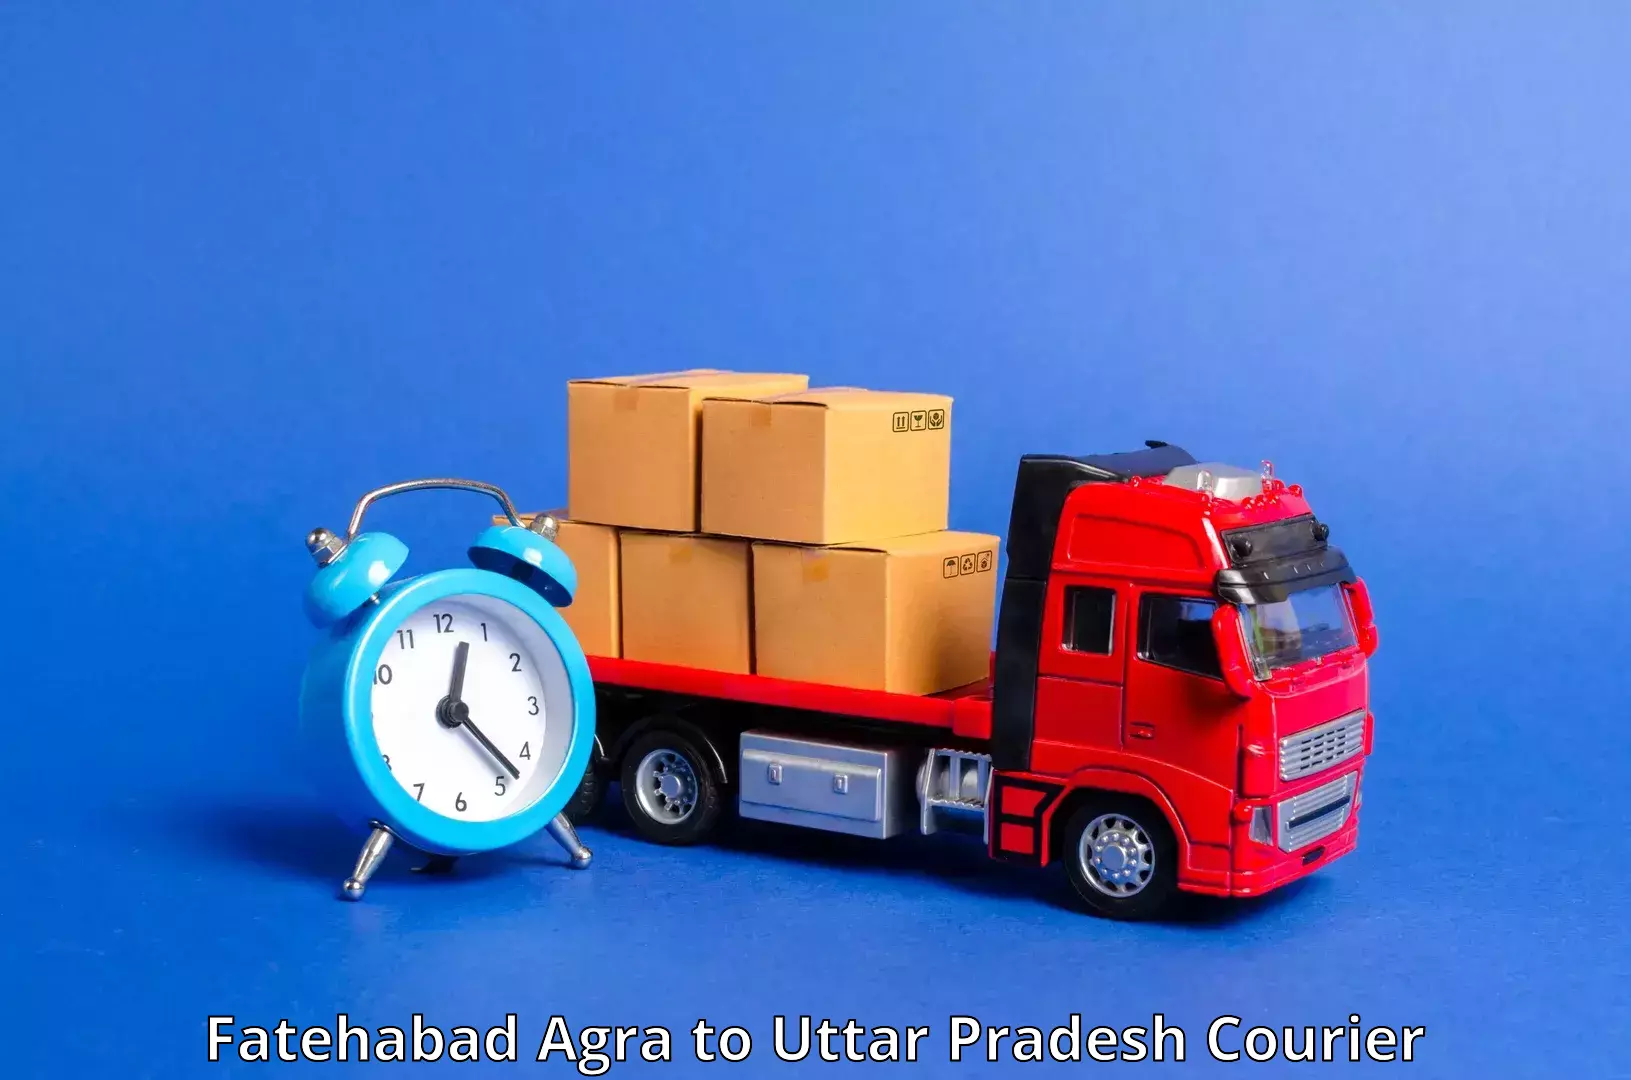 Small parcel delivery Fatehabad Agra to Lal Gopalganj